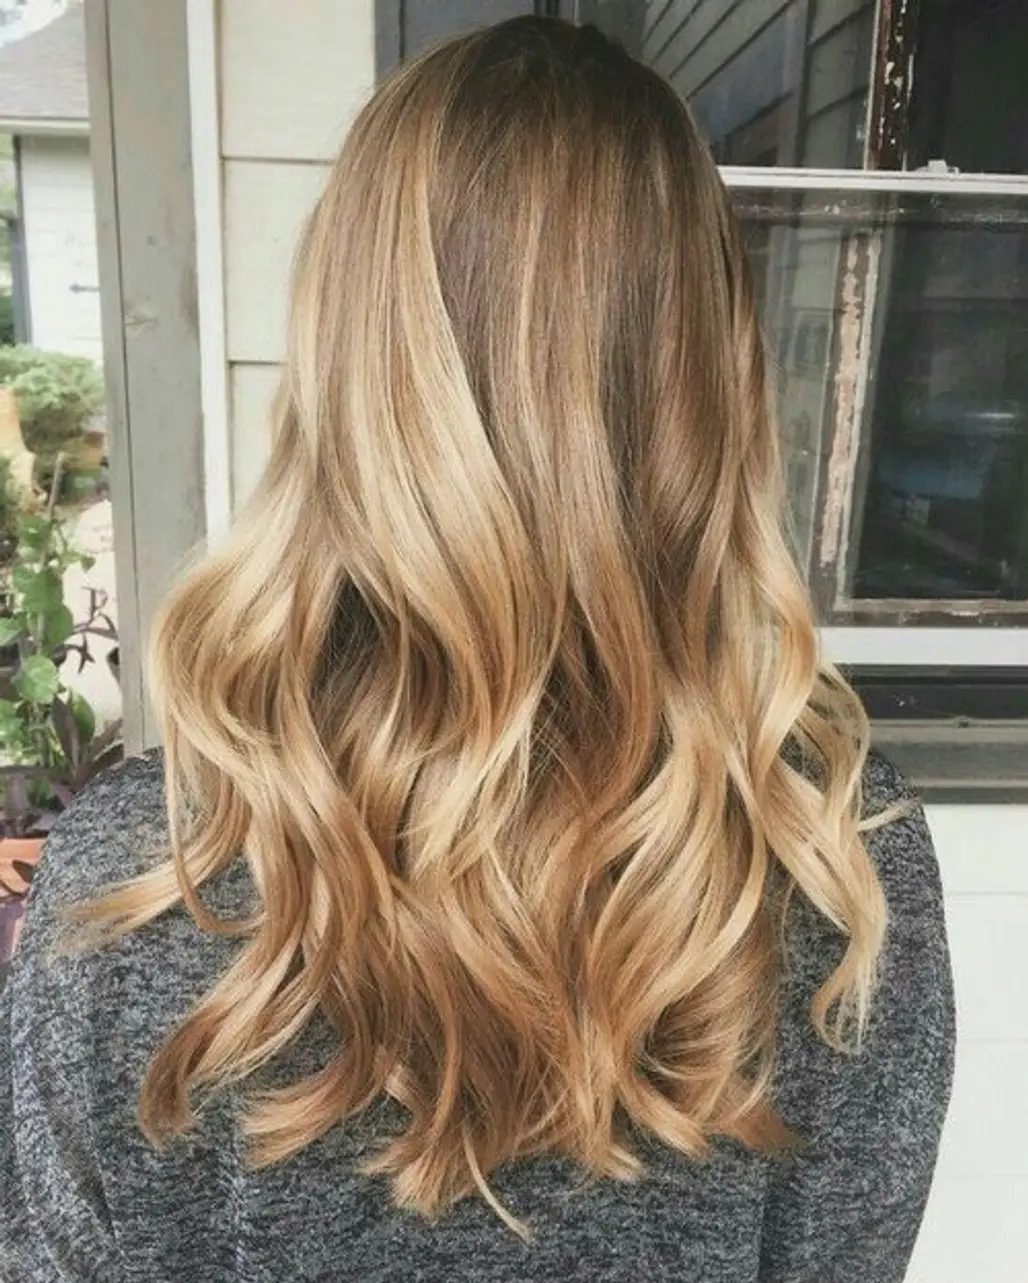 hair,human hair color,clothing,blond,hairstyle,